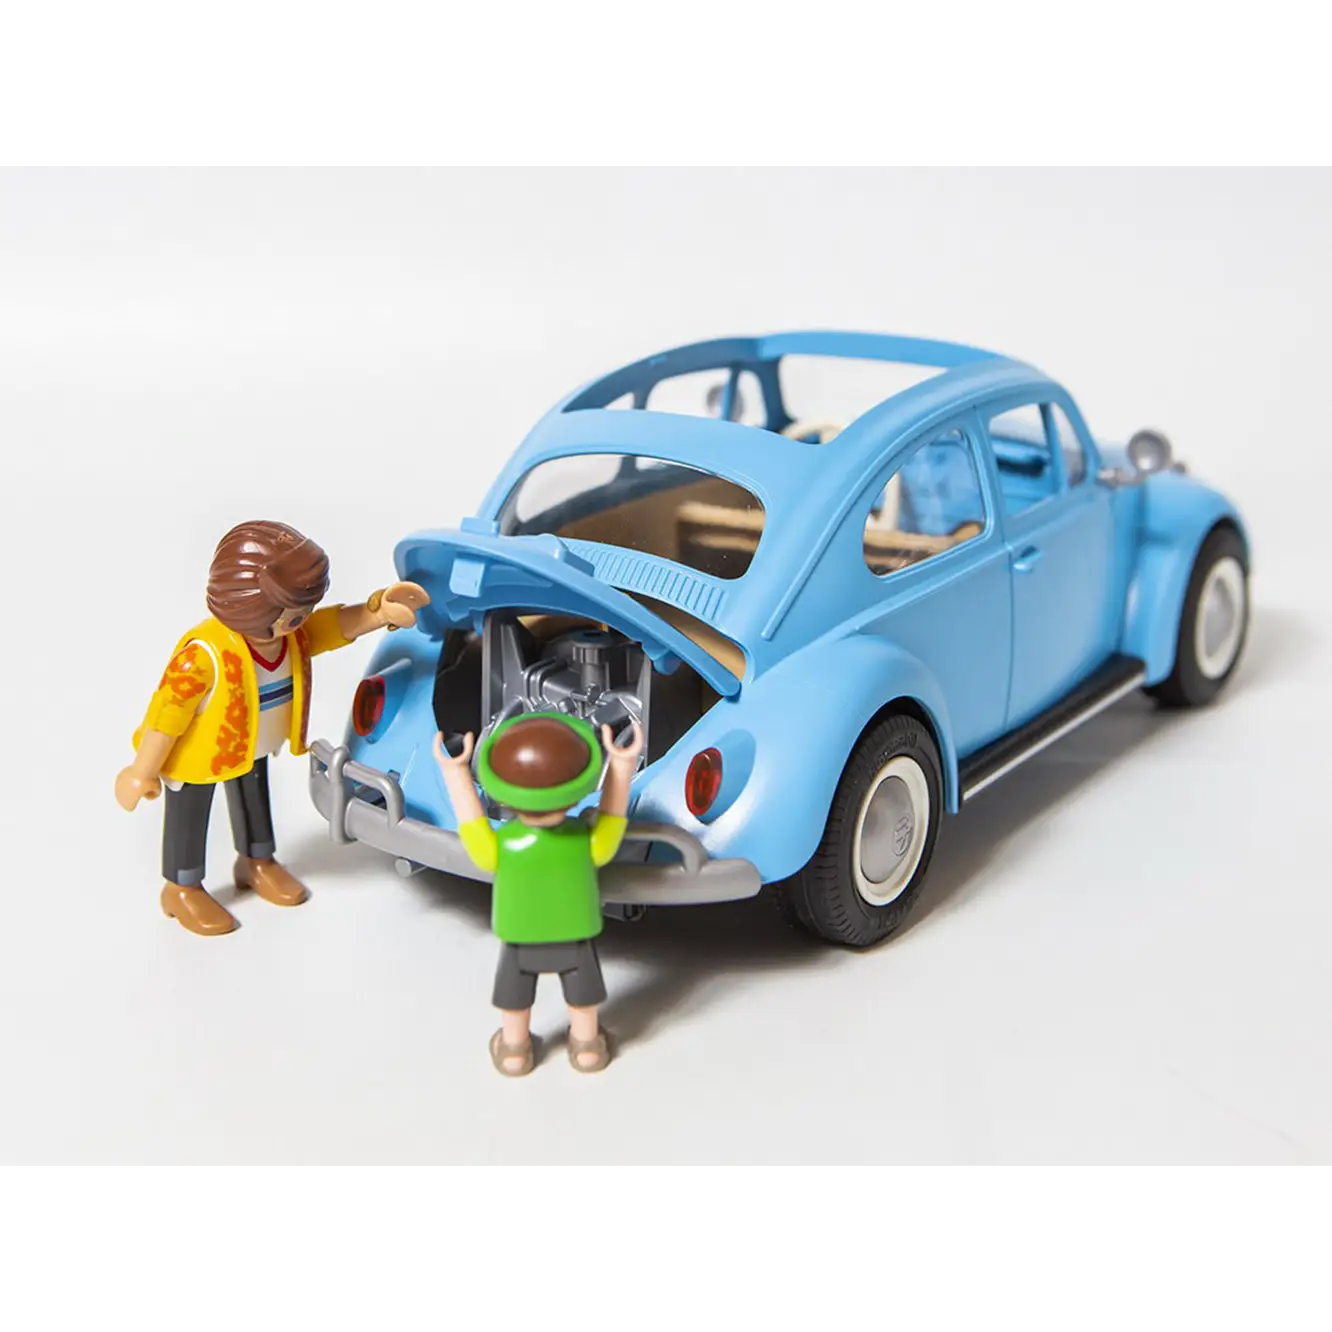 Playmobil Volkswagen Beetle 70177 (for kids 5 yrs old and up